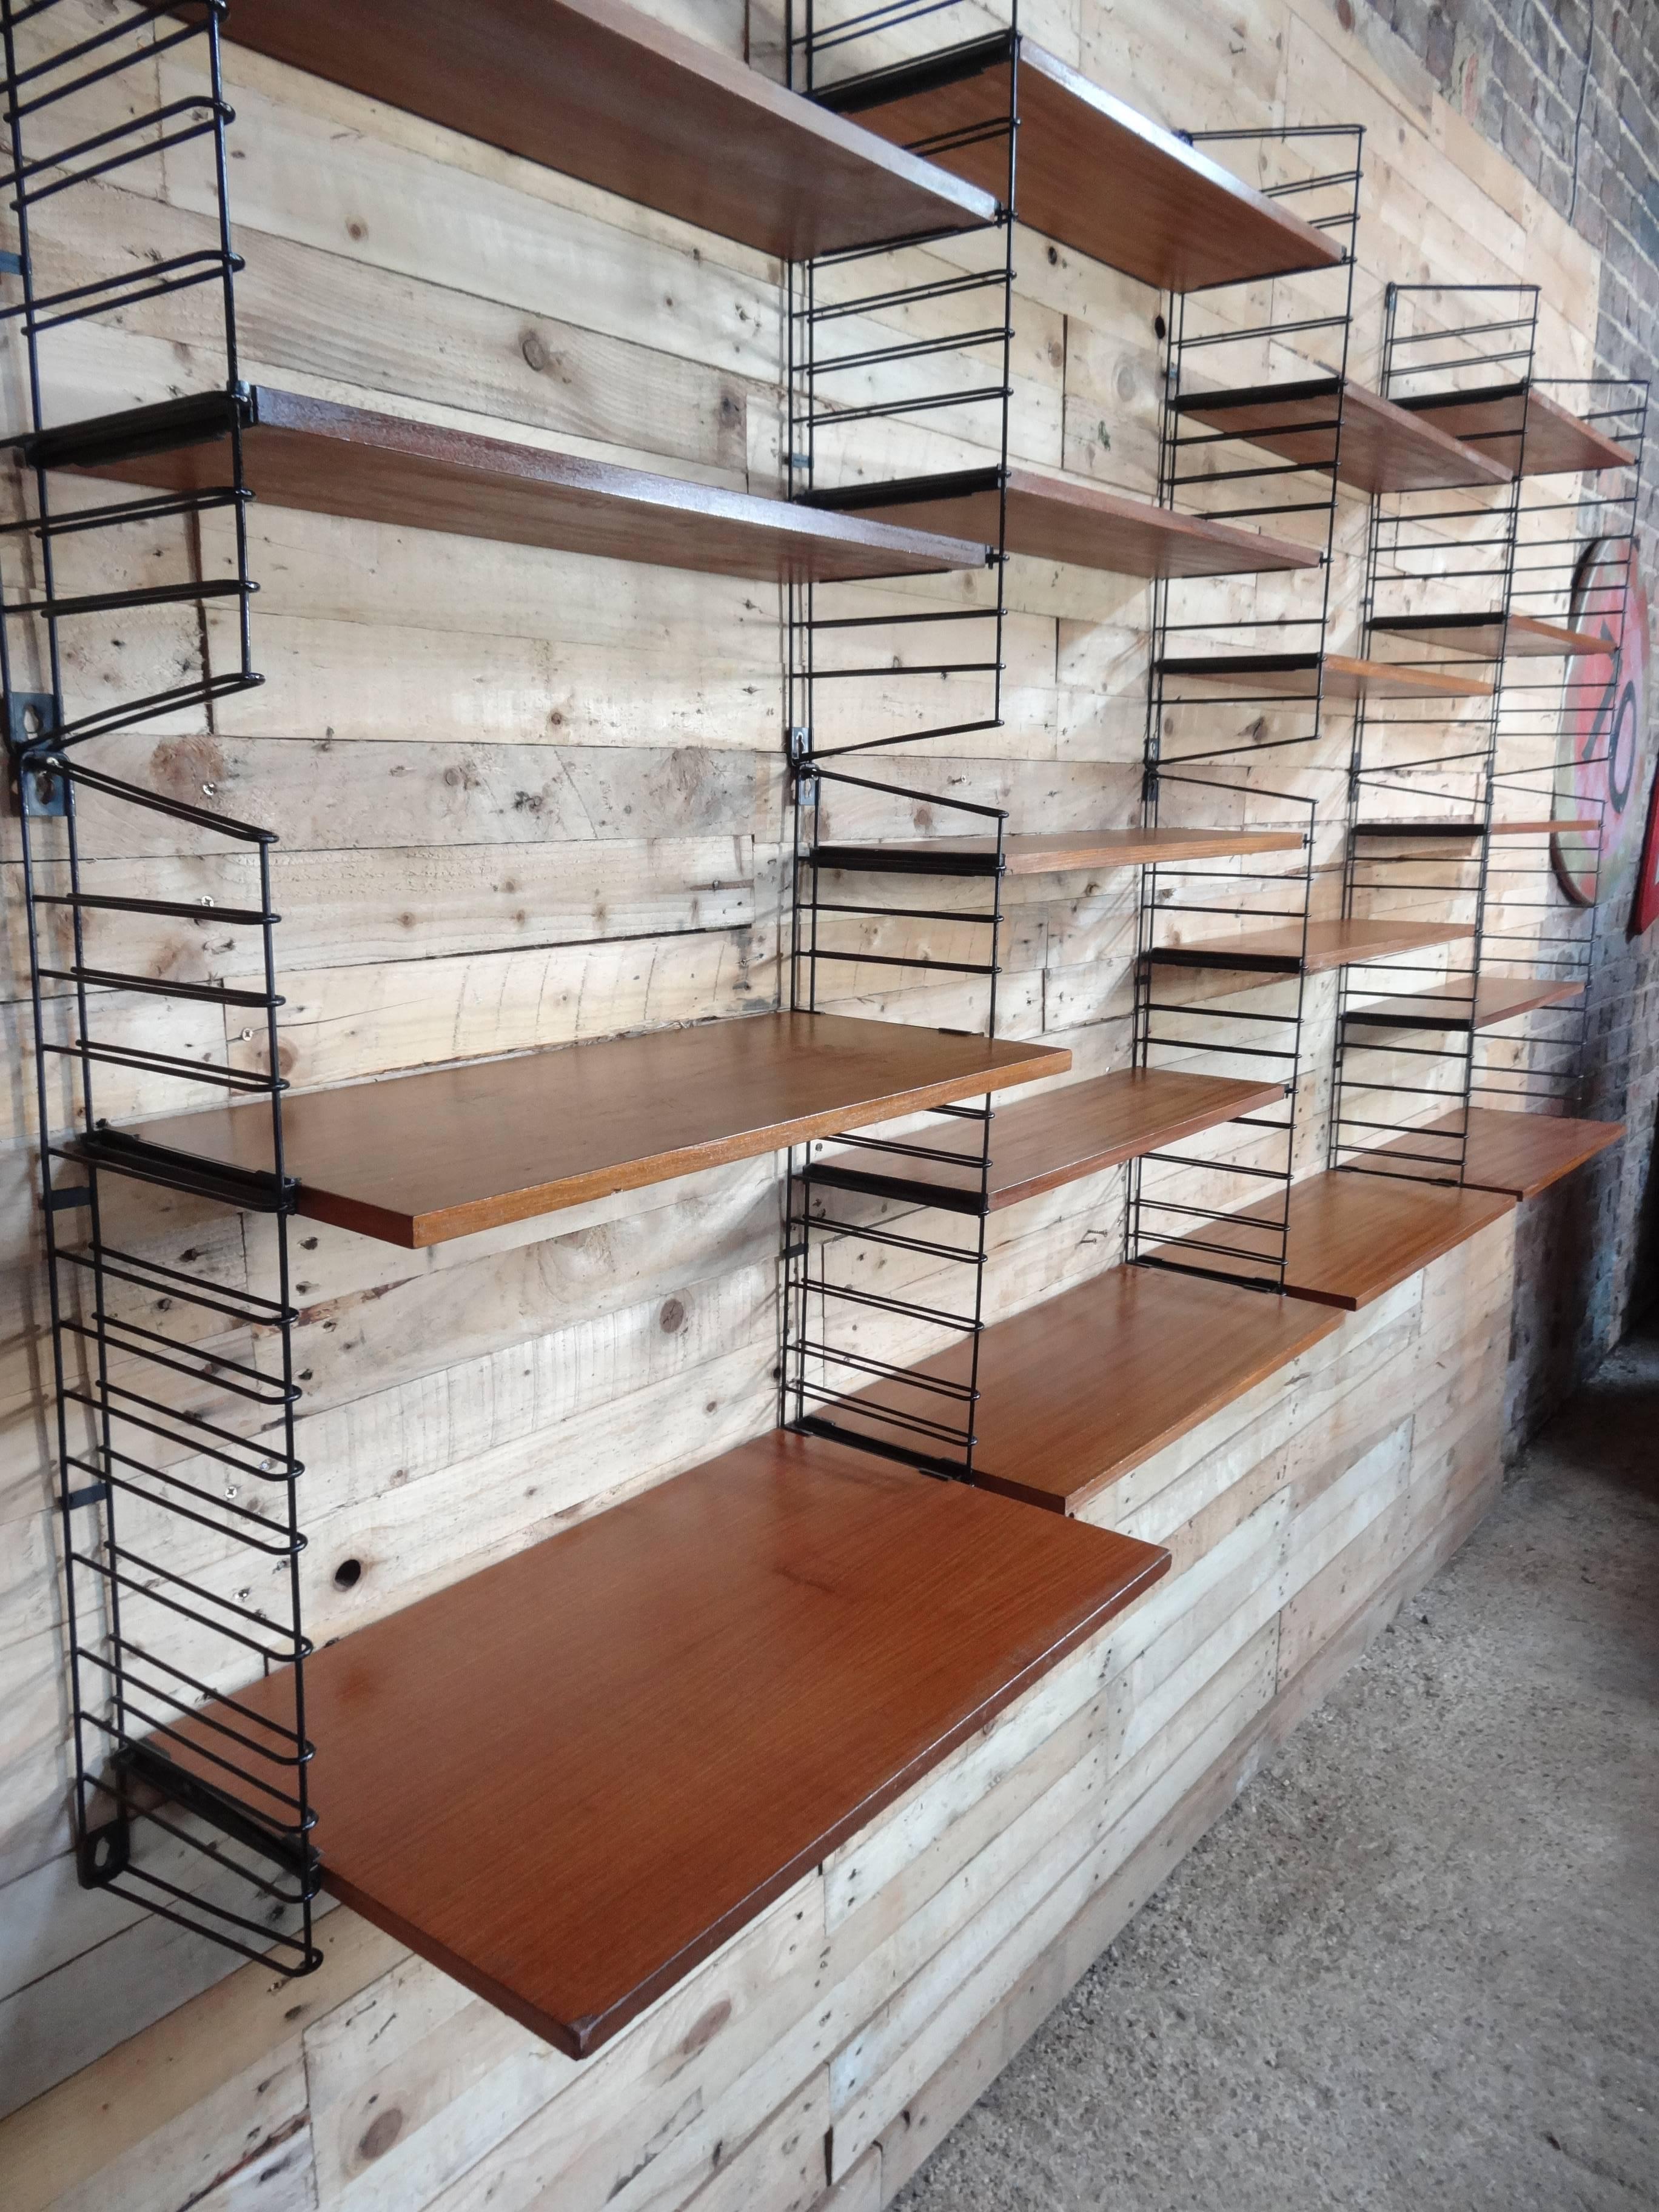 Stunning sought after extra large Tomado rack in very good vintage condition, you will not find another one for sale like this one! Designed by D Dekker for Tomado. The rack comes with ten ladders and 17 teak shelves (four wide ones) and a desk